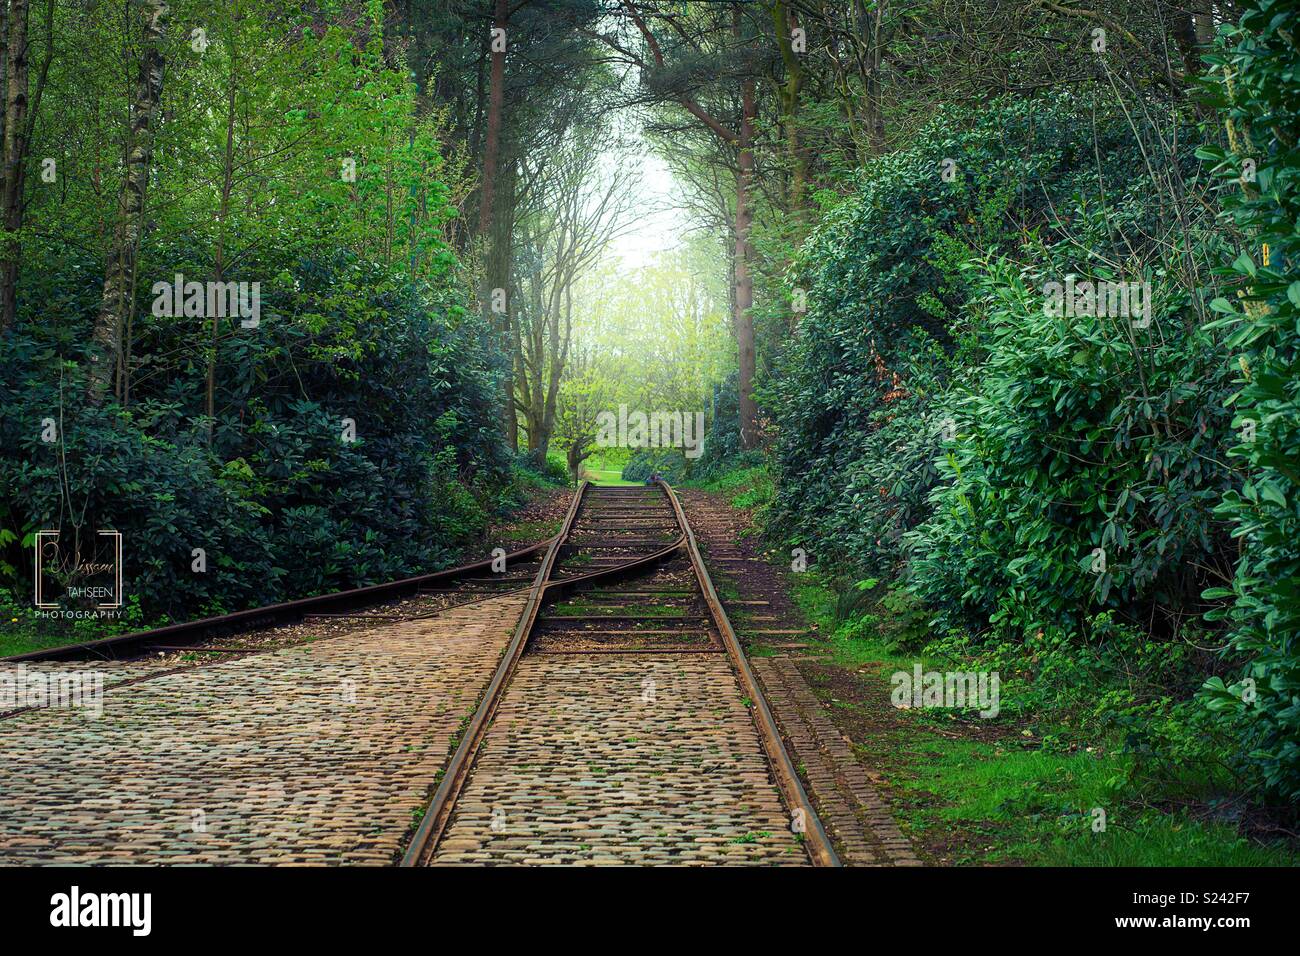 A train route passes through the wonderful nature of England during the spring Stock Photo